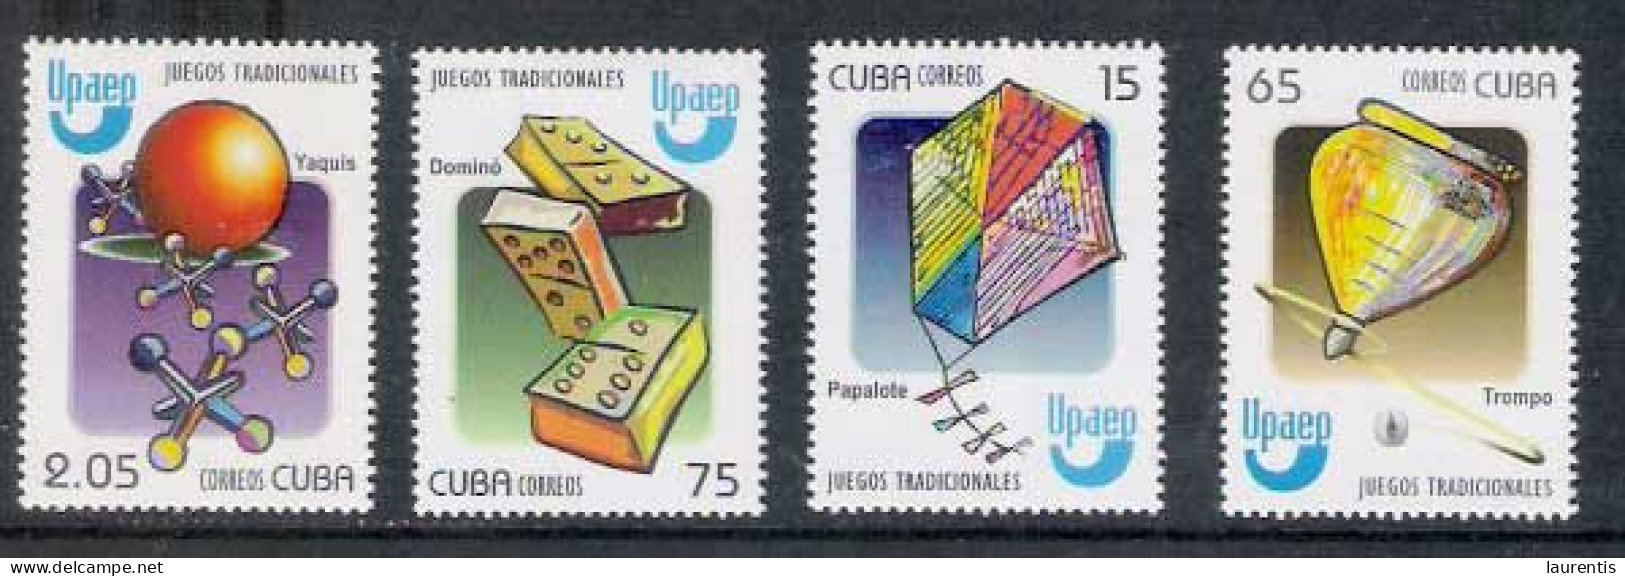 649. Toys - Jouets - Games - 2012 - MNH - Cb - 2,50 - Unclassified